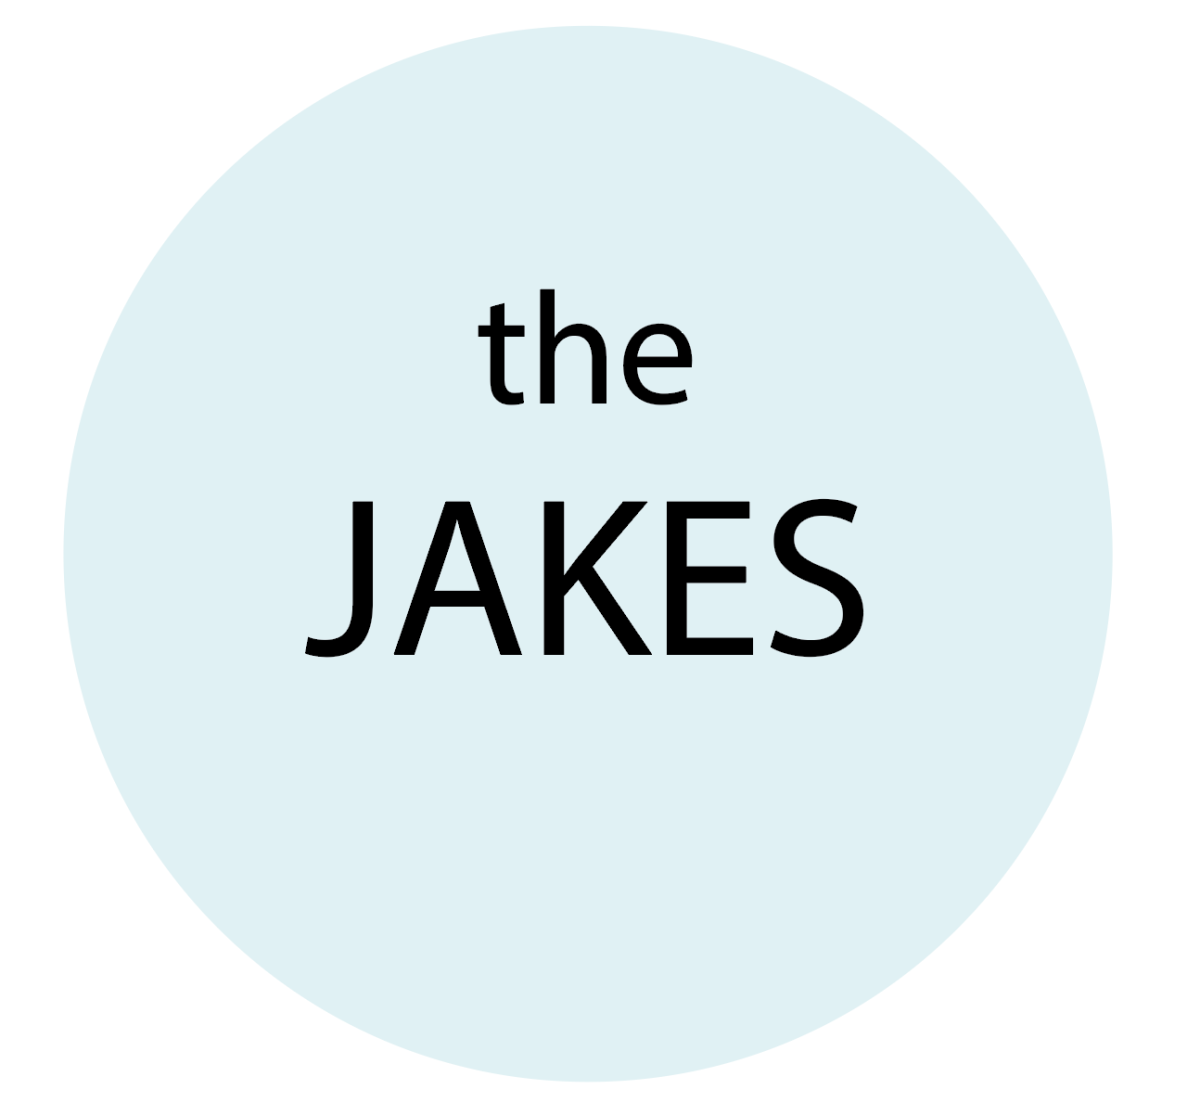 Just the Jakes